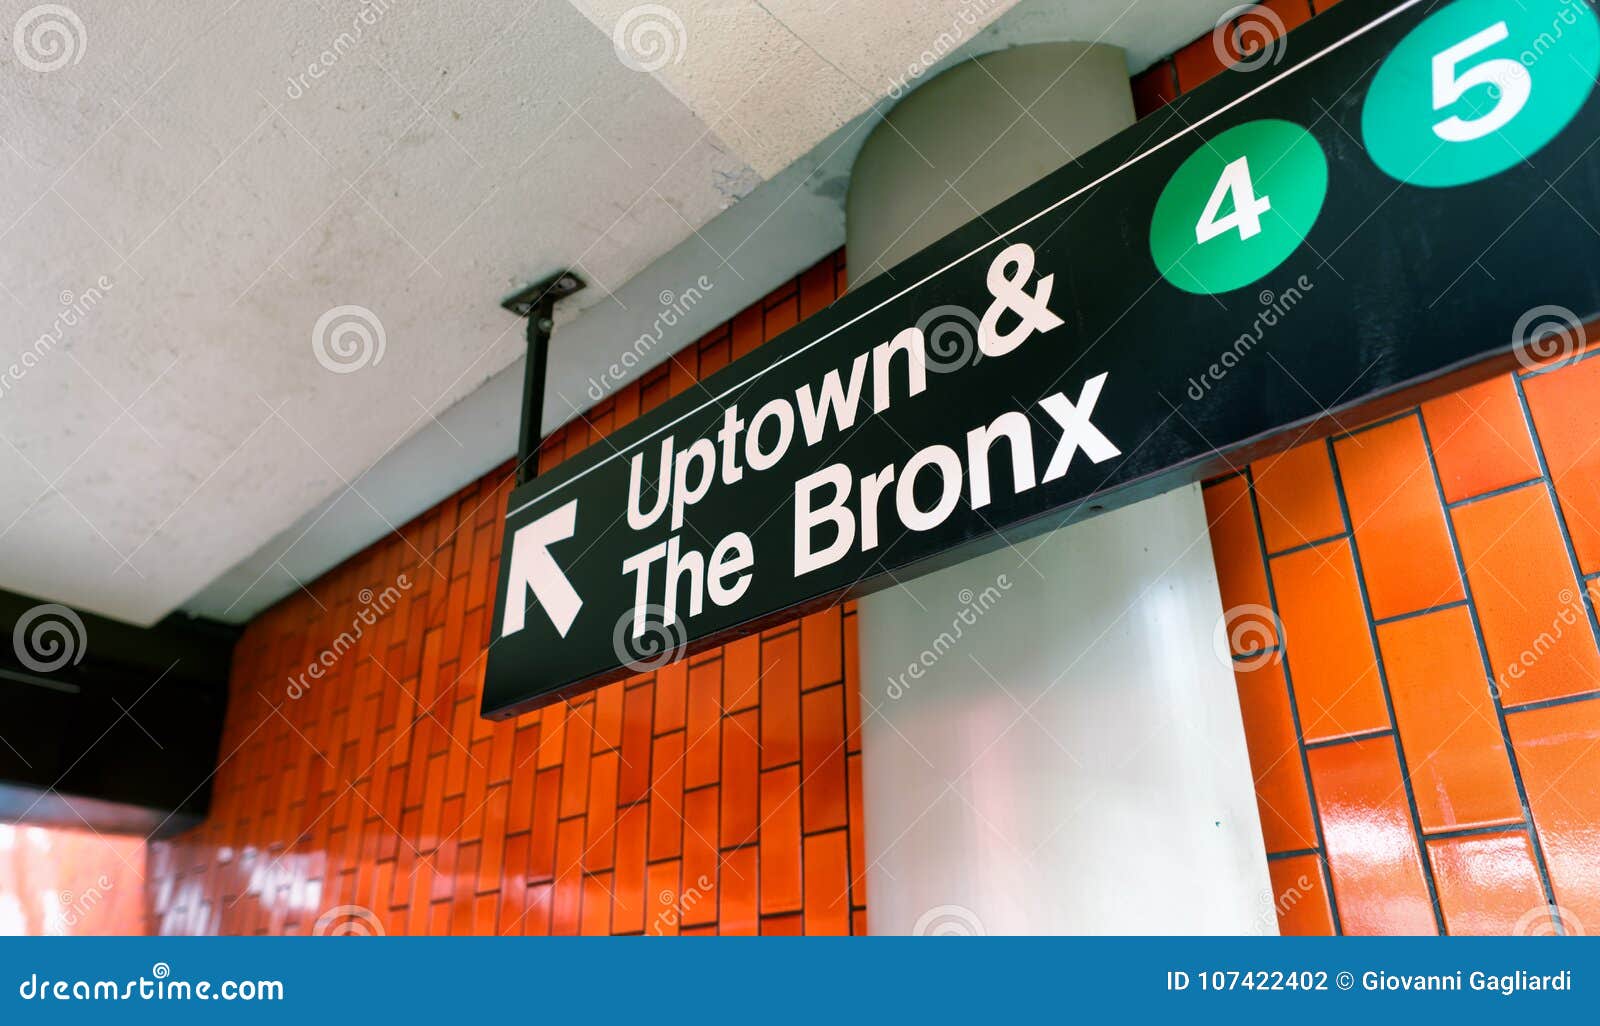 new york city - june 8, 2013: uptown and the bronx station sign.